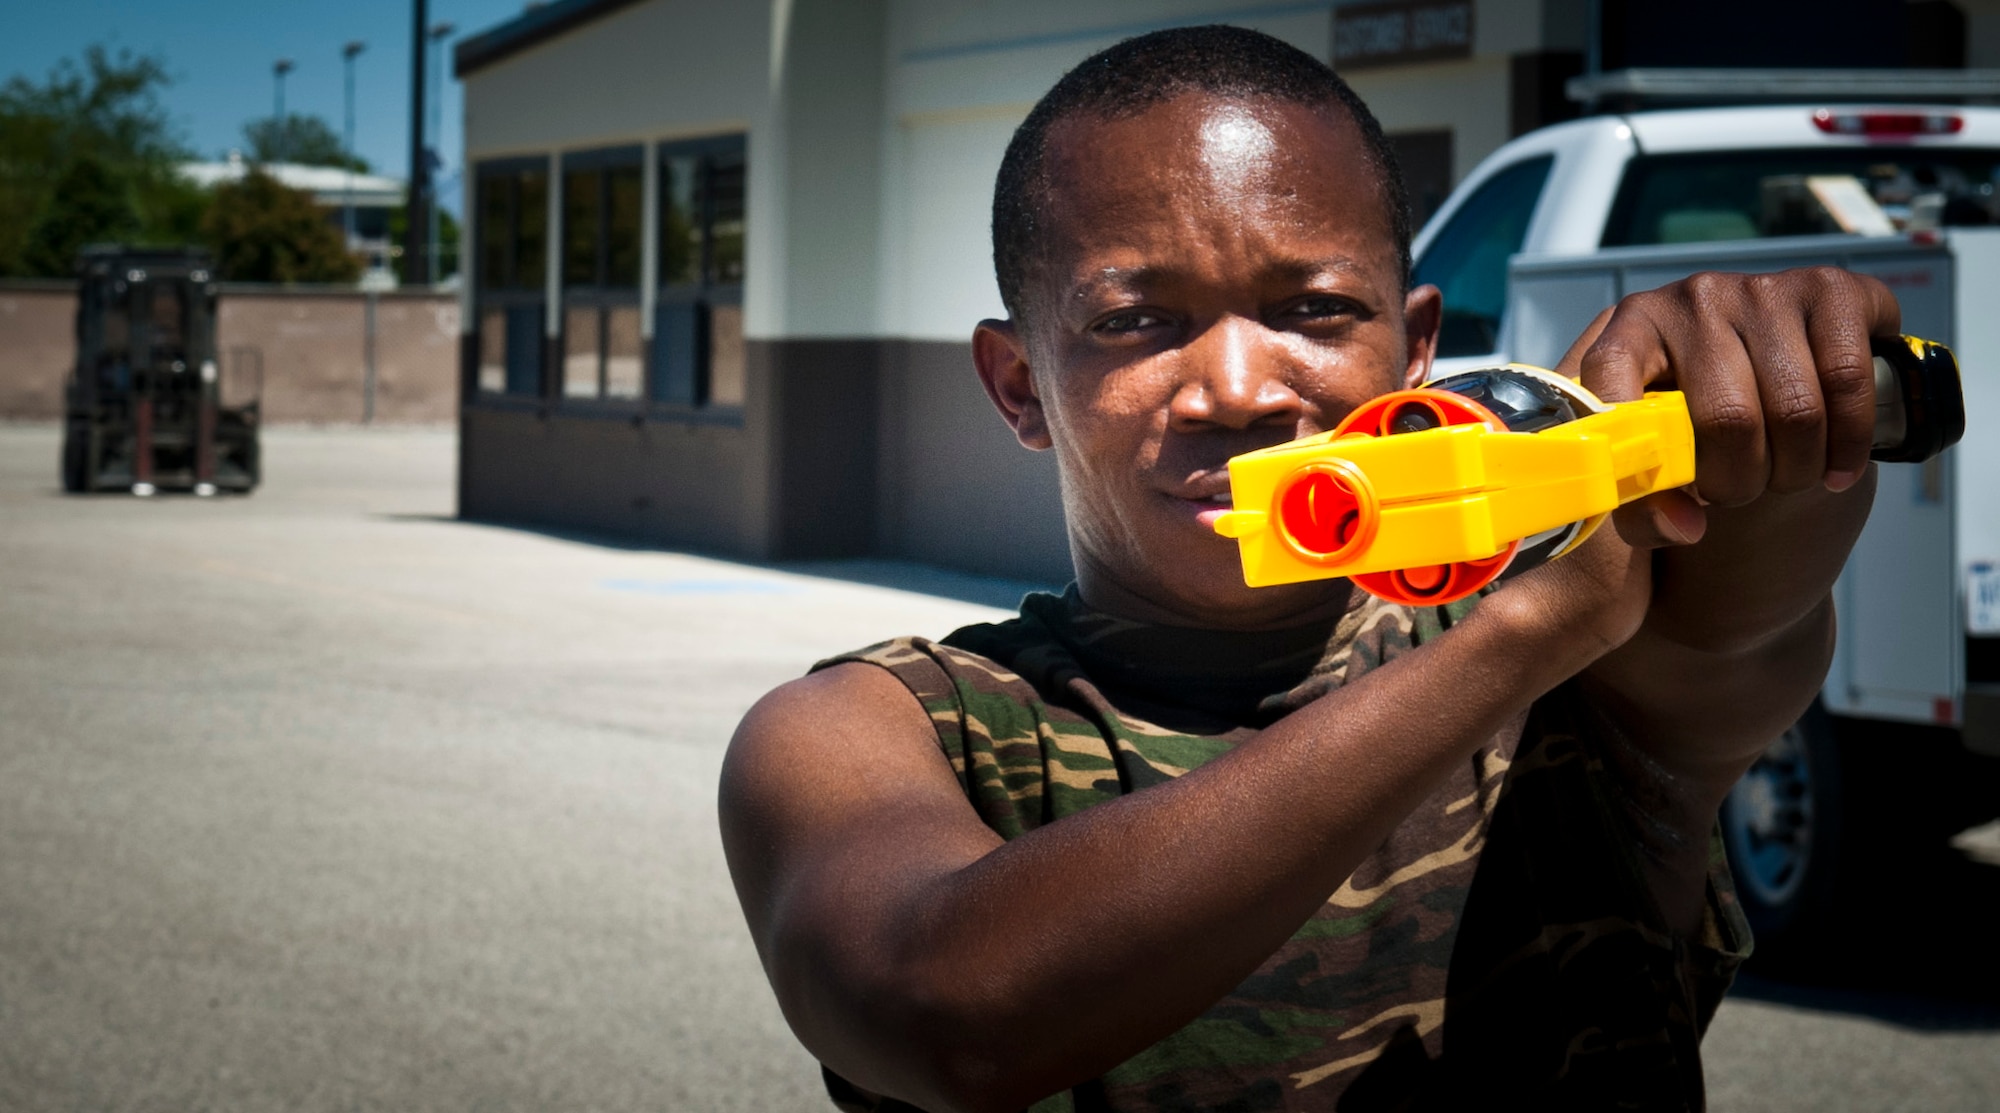 U.S. Air Force Senior Airman Urbain Dobessi, 366th Logistics Readiness Squadron management and analysis journeyman, poses for a photo June 5, 2013, at Mountain Home Air Force Base, Idaho. Dobessi was one of many “humans” who participated in a team building exercise which involved killing zombies with nerf guns. (U.S. Air Force photo by Airman 1st Class Malissa Lott/Released)